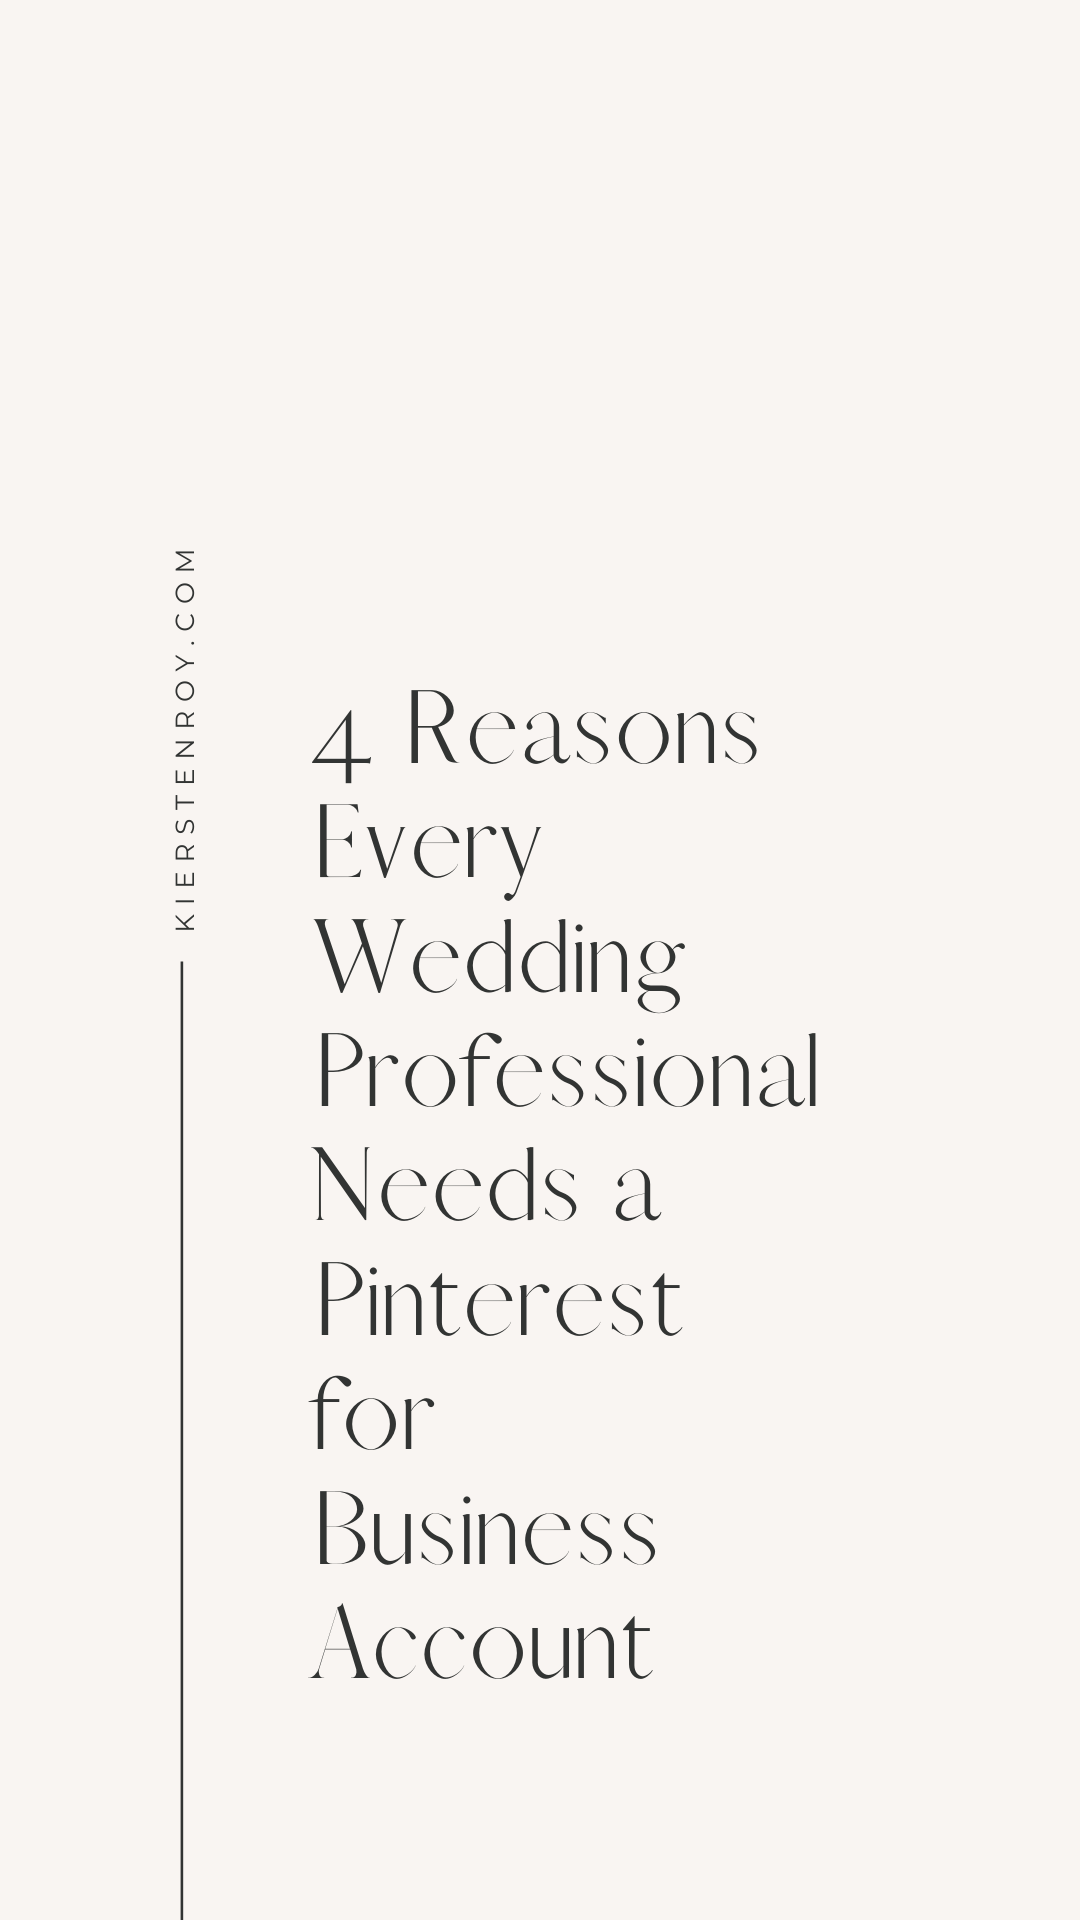 4 Reasons Every Wedding Professional Should Be Using Pinterest For Business